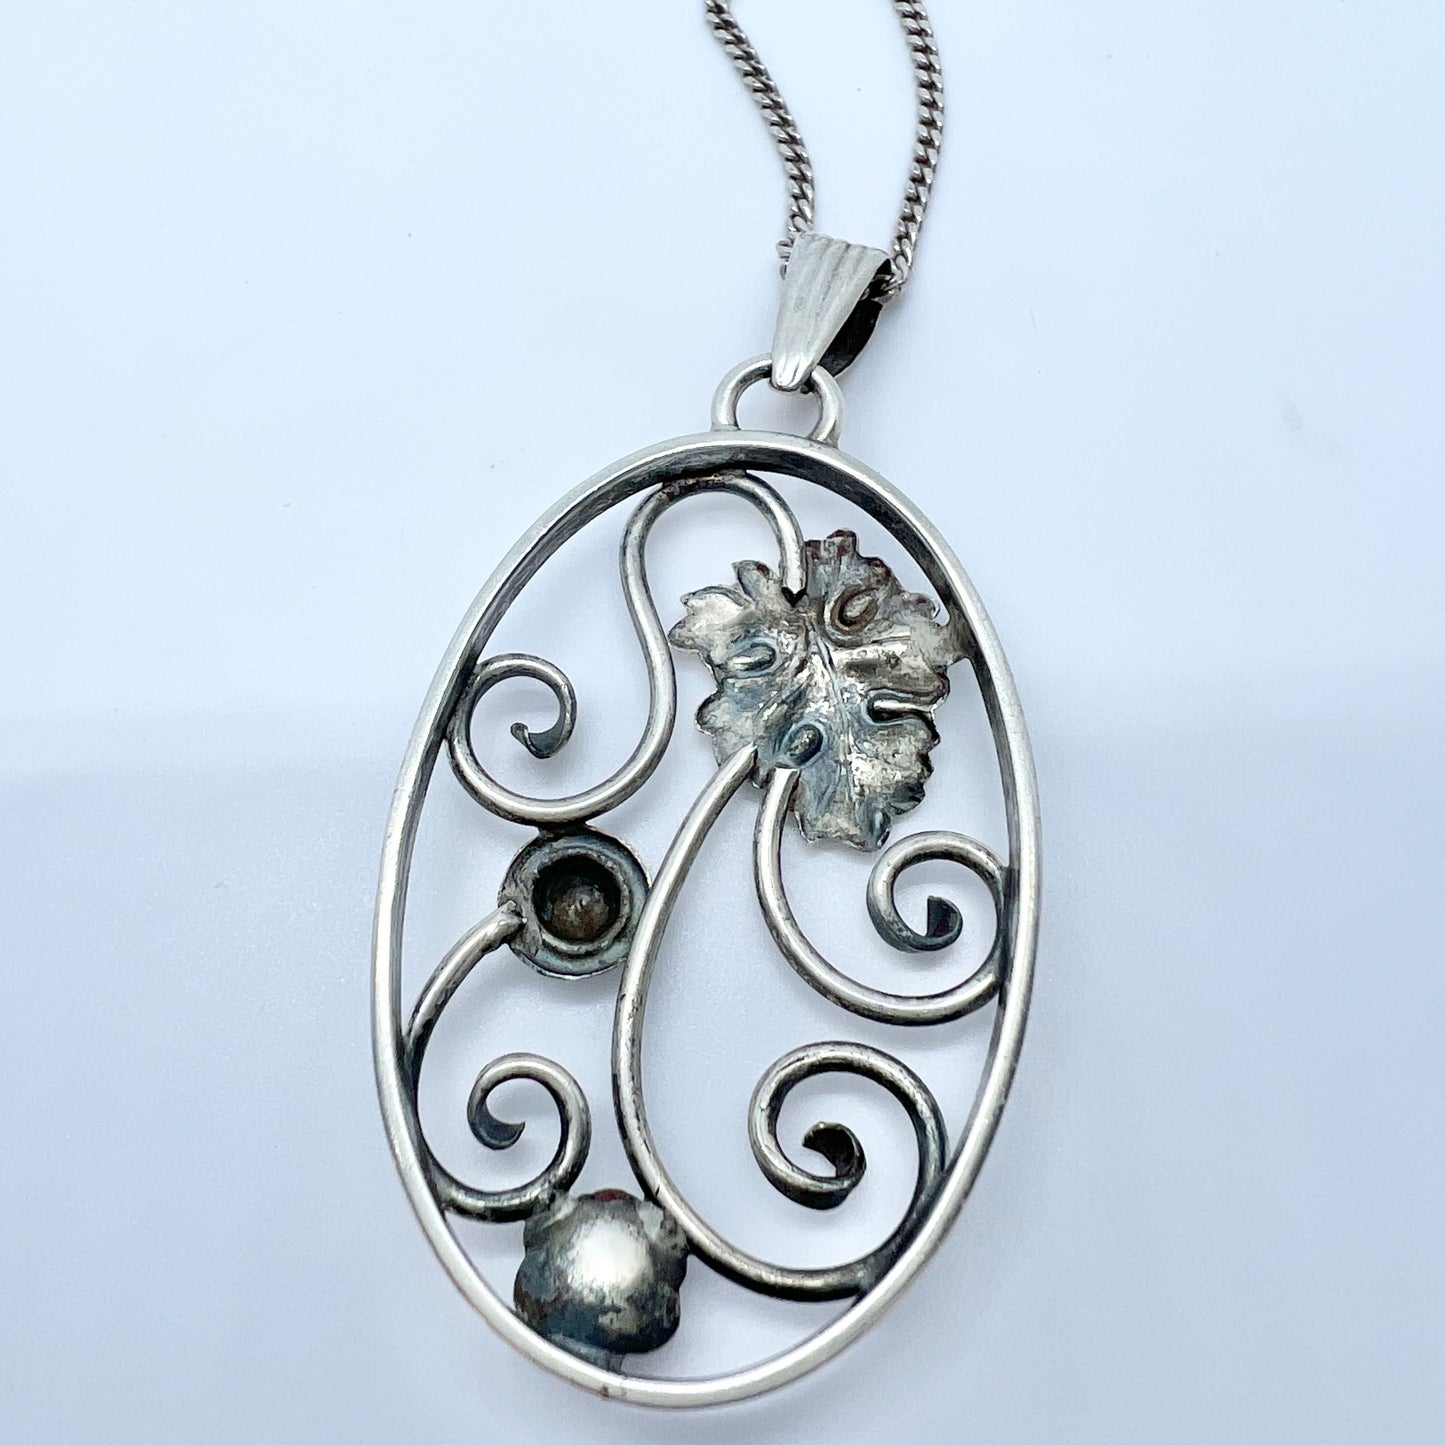 Denmark 1940-50s. Vintage Solid Silver Pendant + Chain.